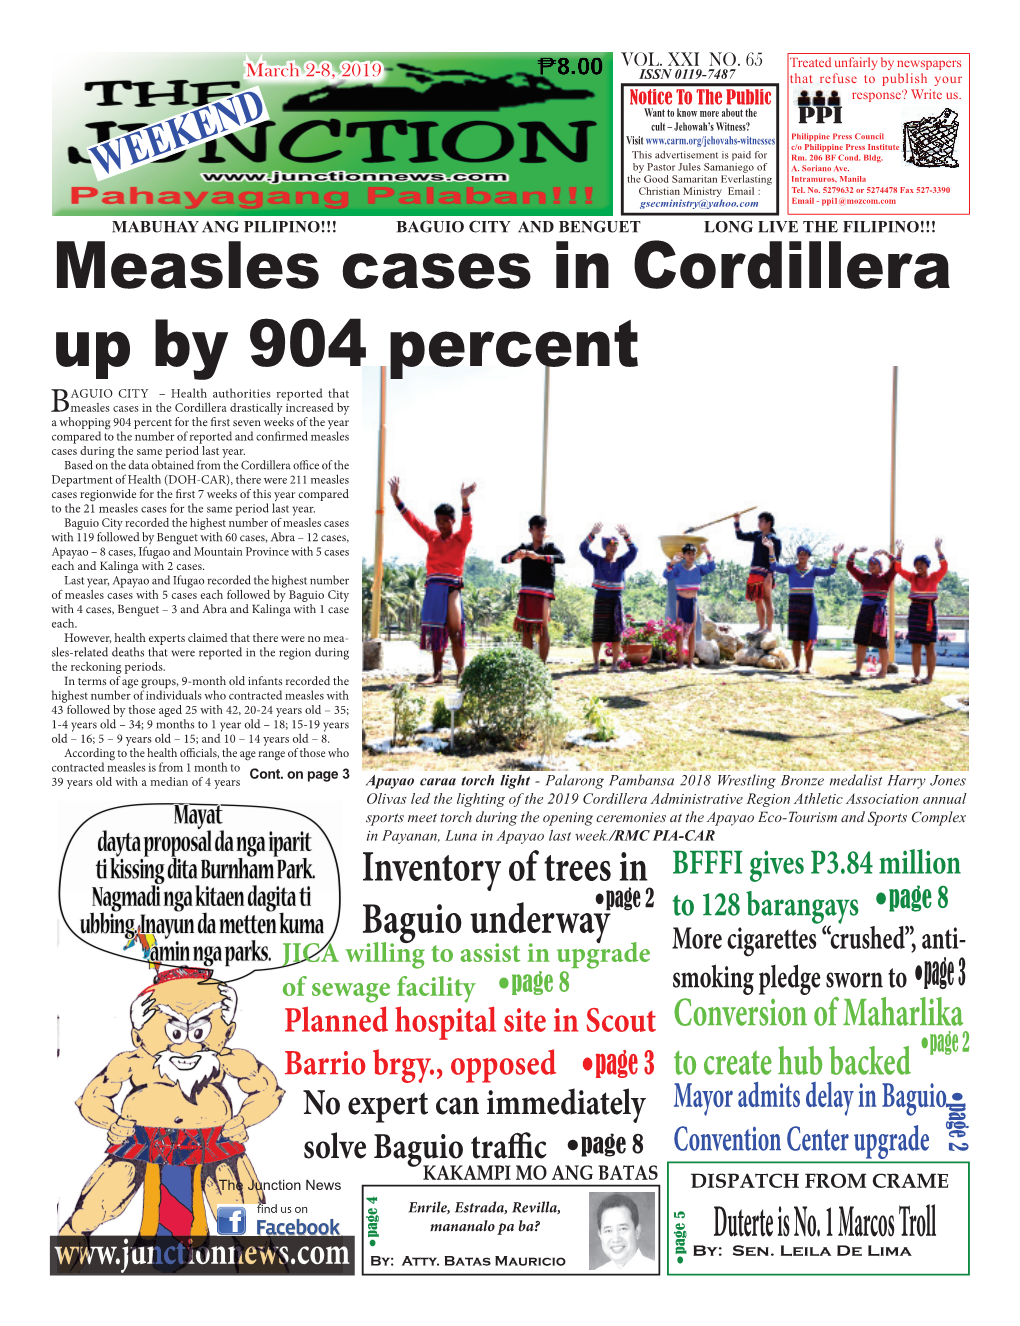 Measles Cases in Cordillera up by 904 Percent